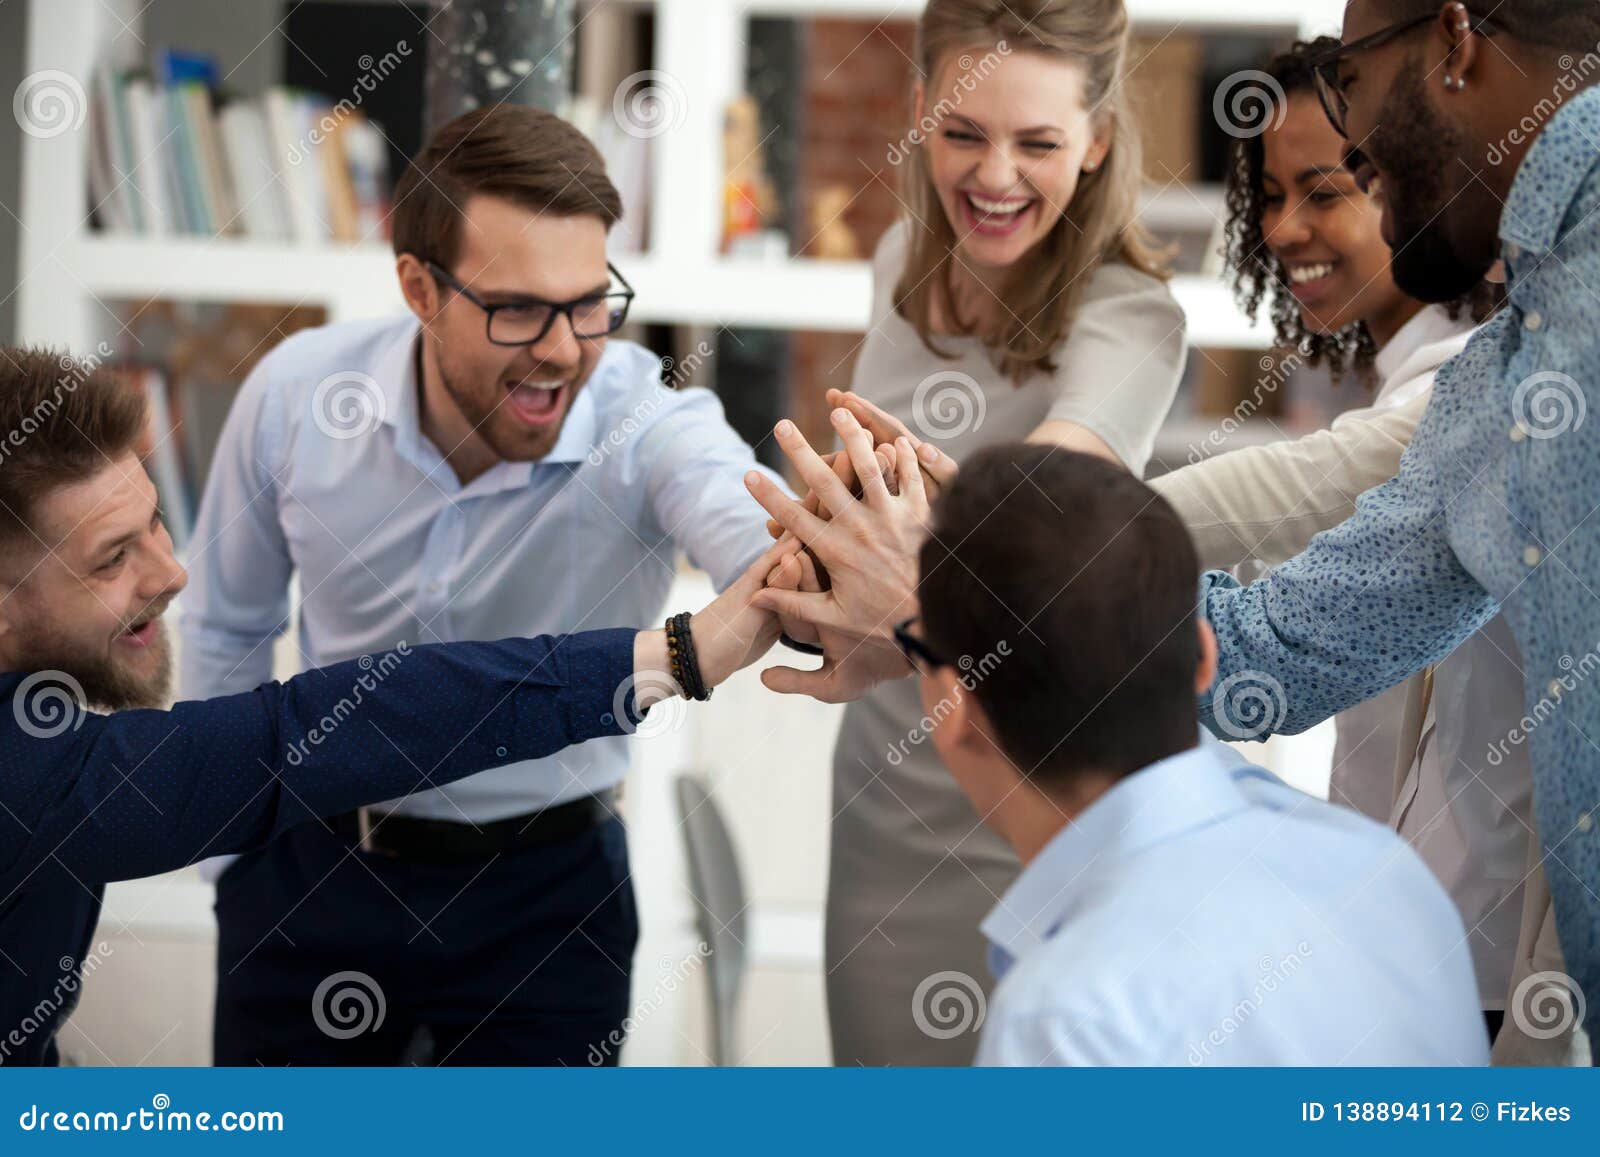 excited motivated multi-ethnic team people give high five in office